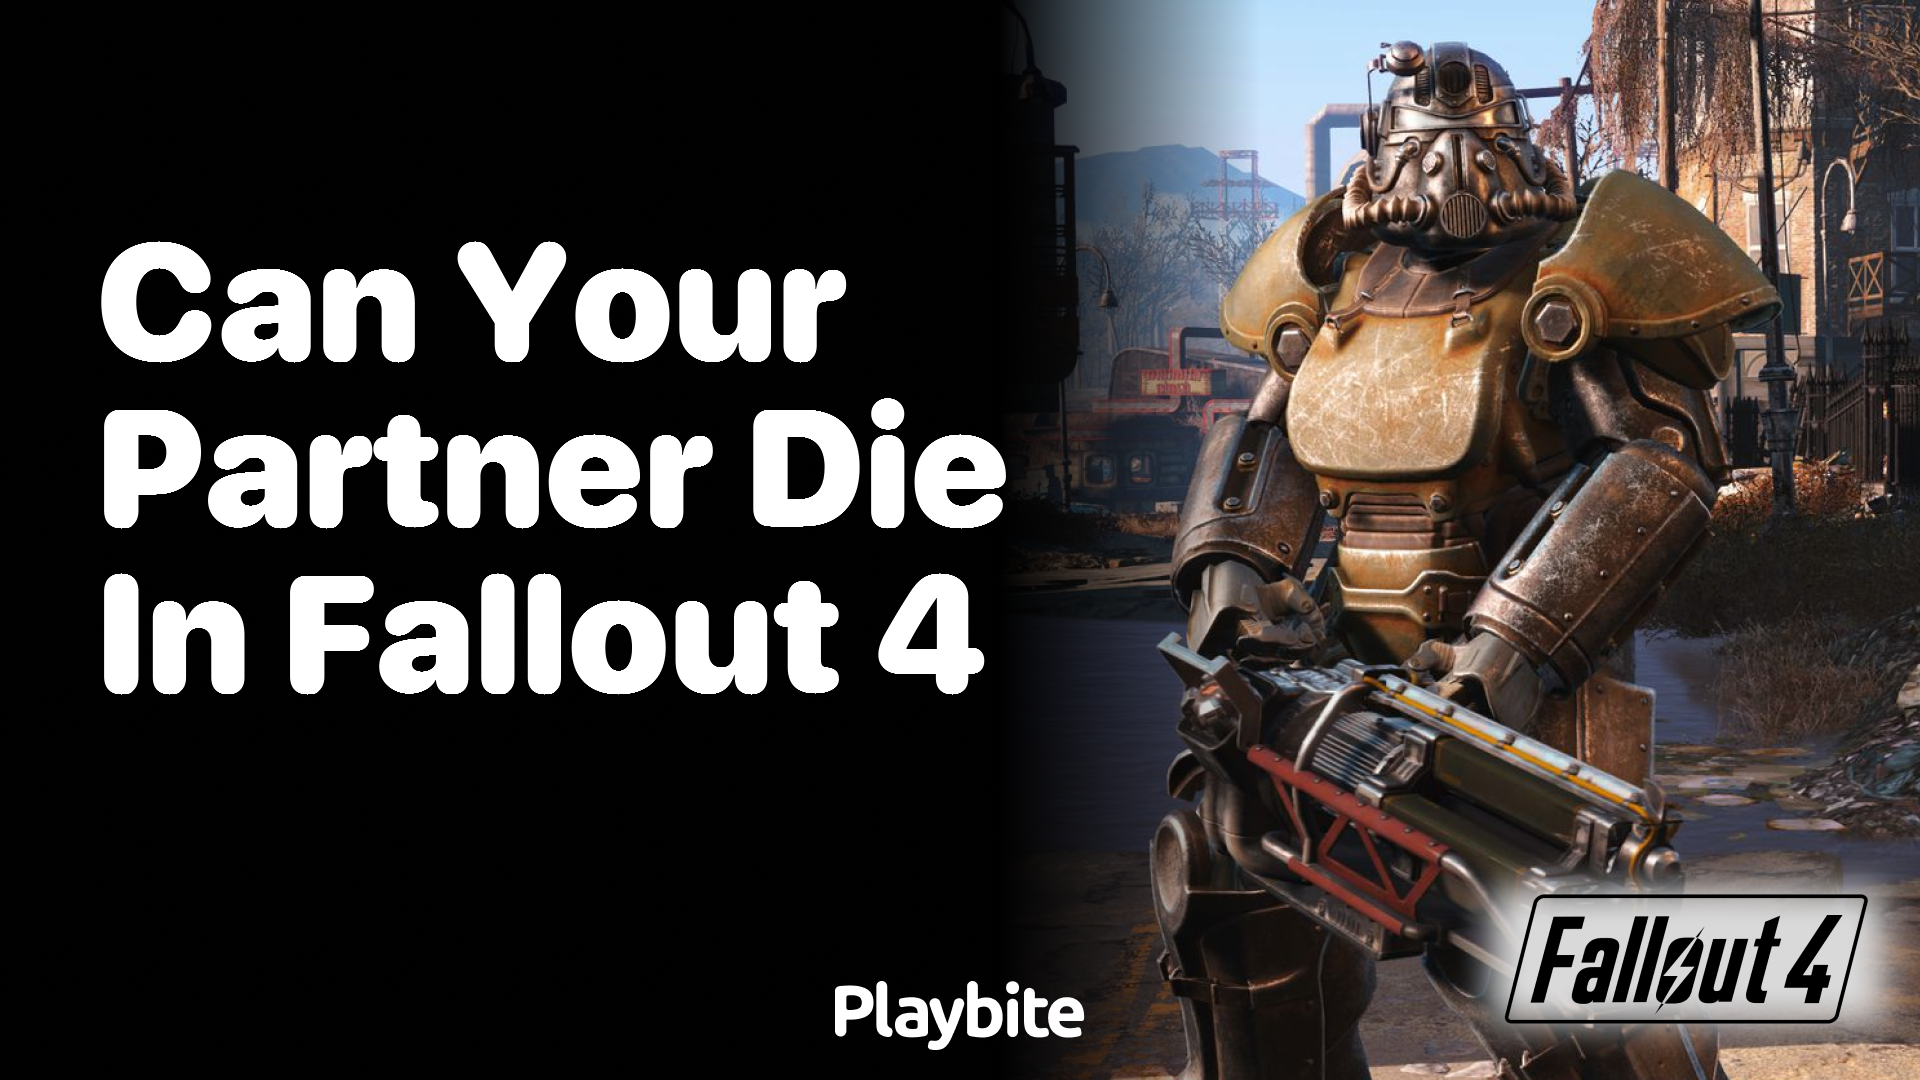 Can Your Partner Die in Fallout 4?